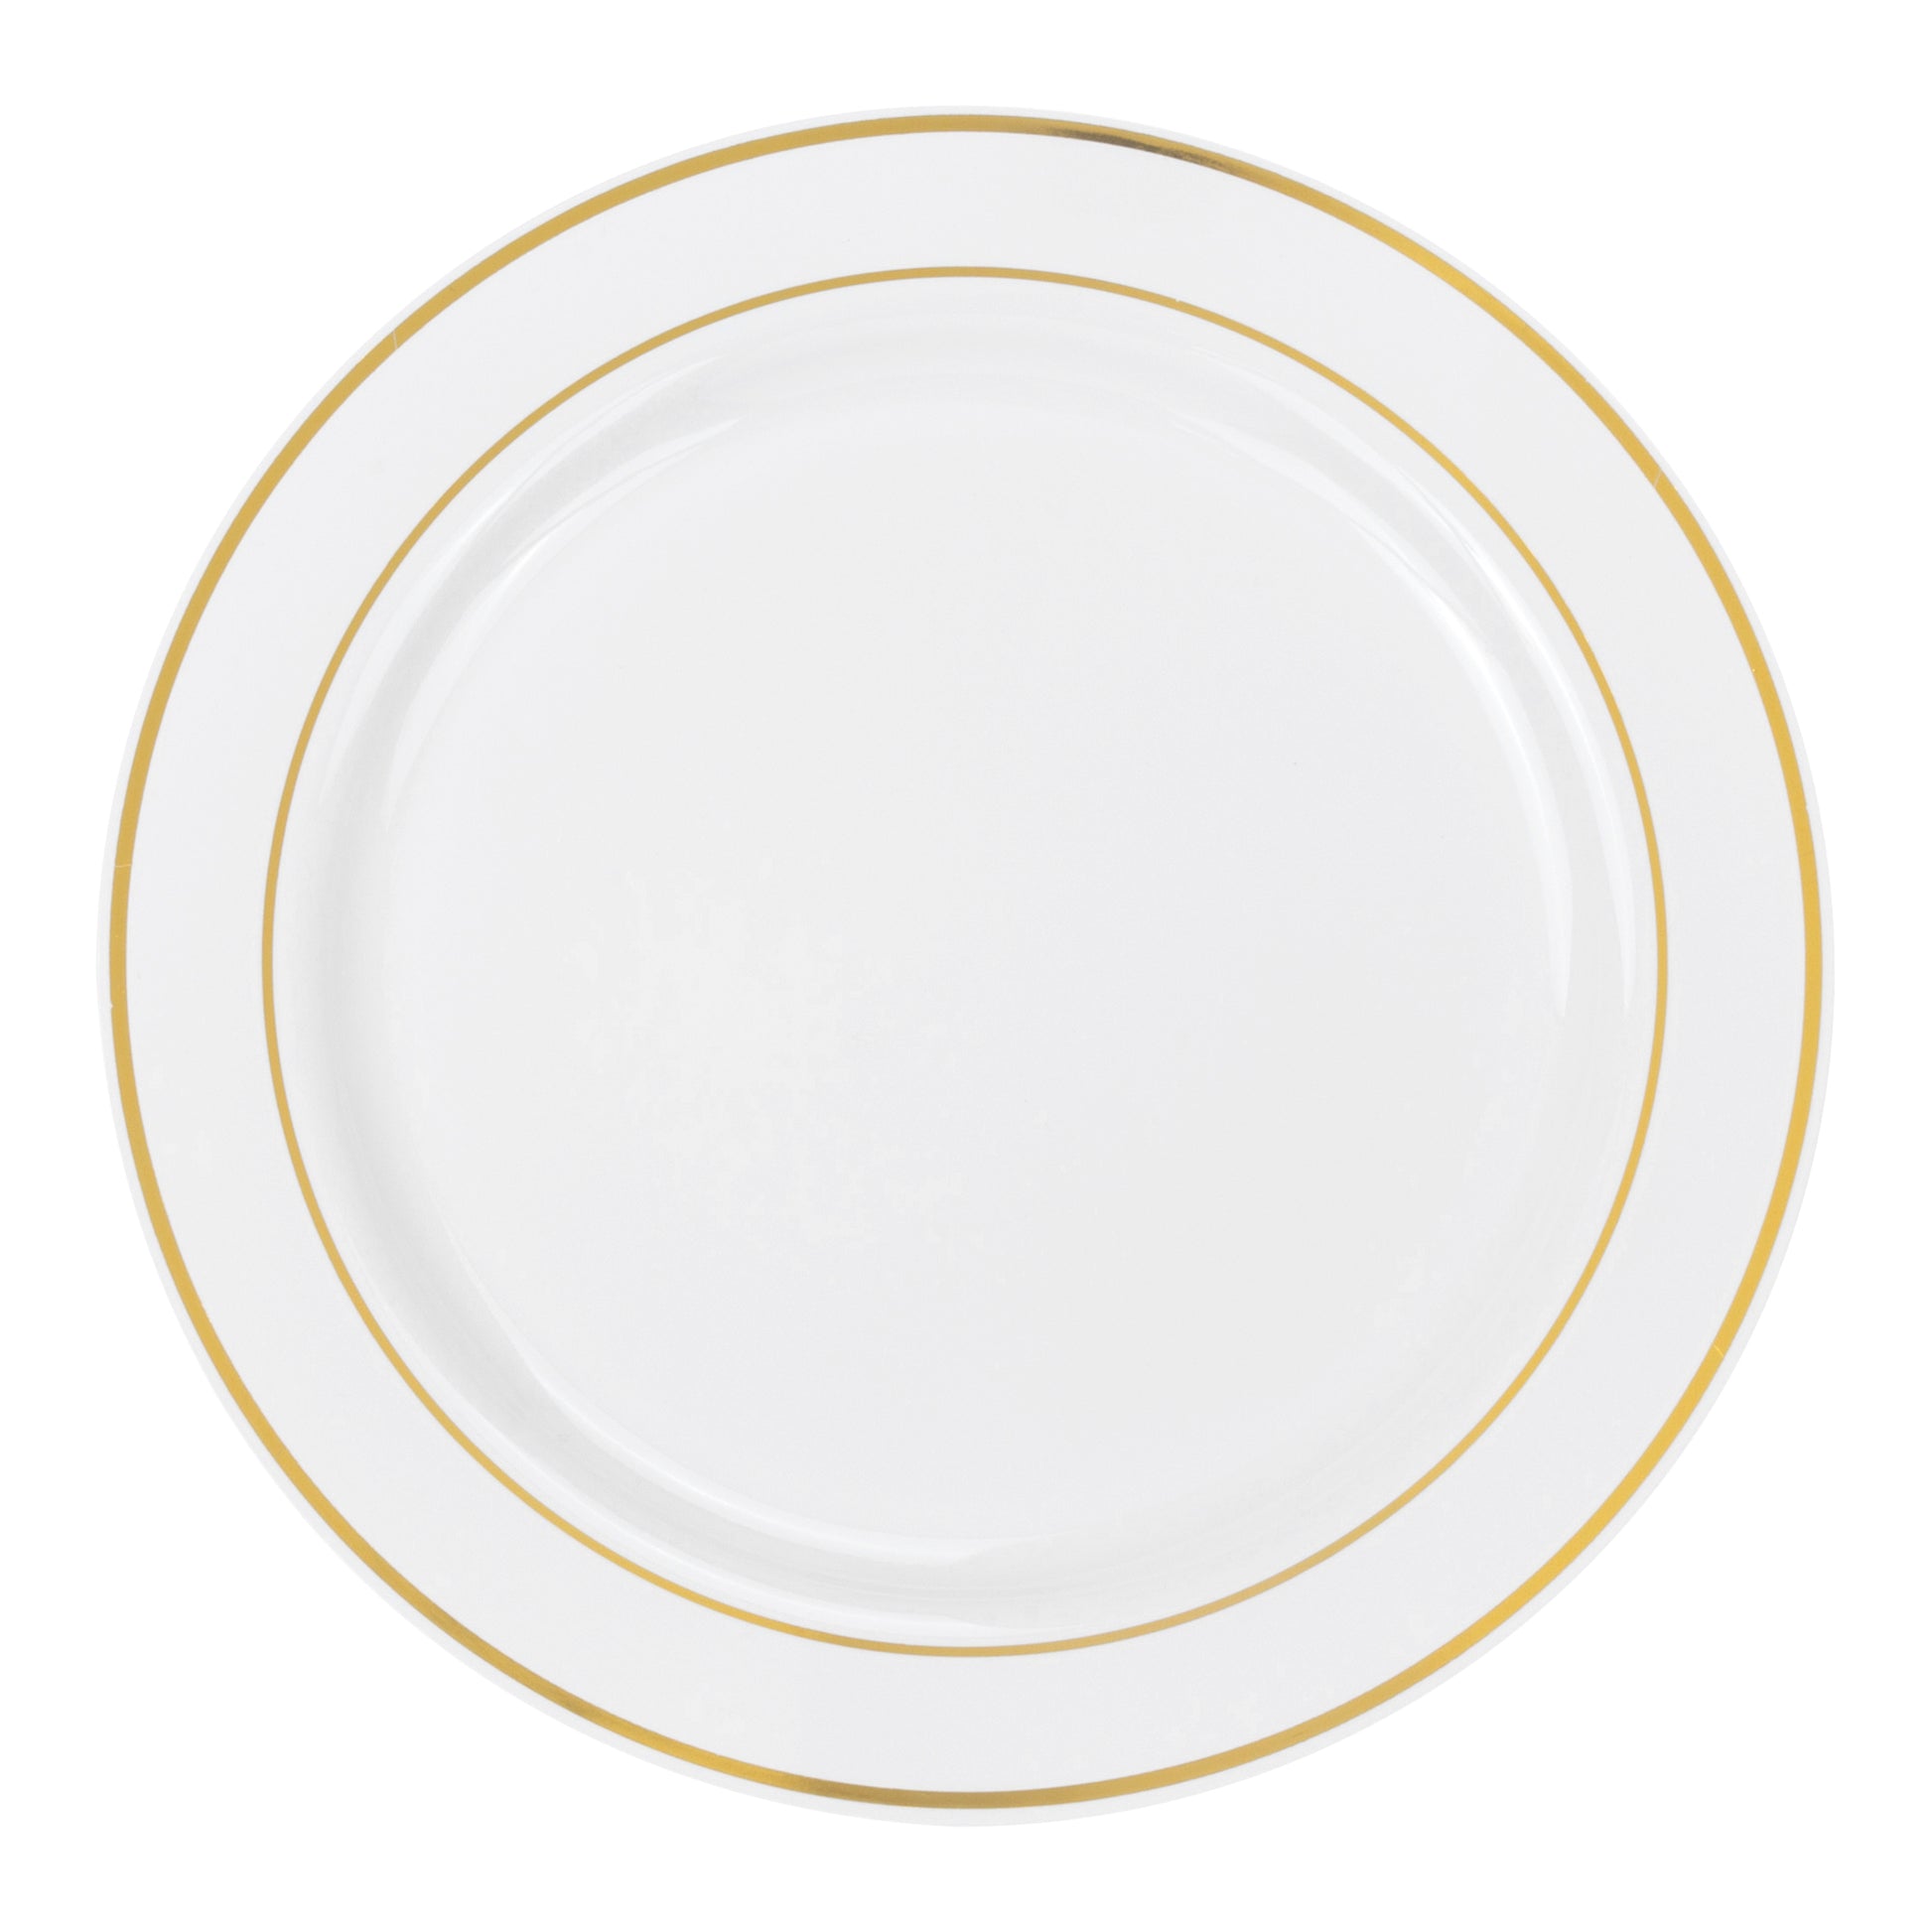 White Silver-Trimmed Scallop Disposable Plastic Plates 40 Pcs Combo Pack Size: 10 in | Wedding | Event | Wholesale by CV Linens